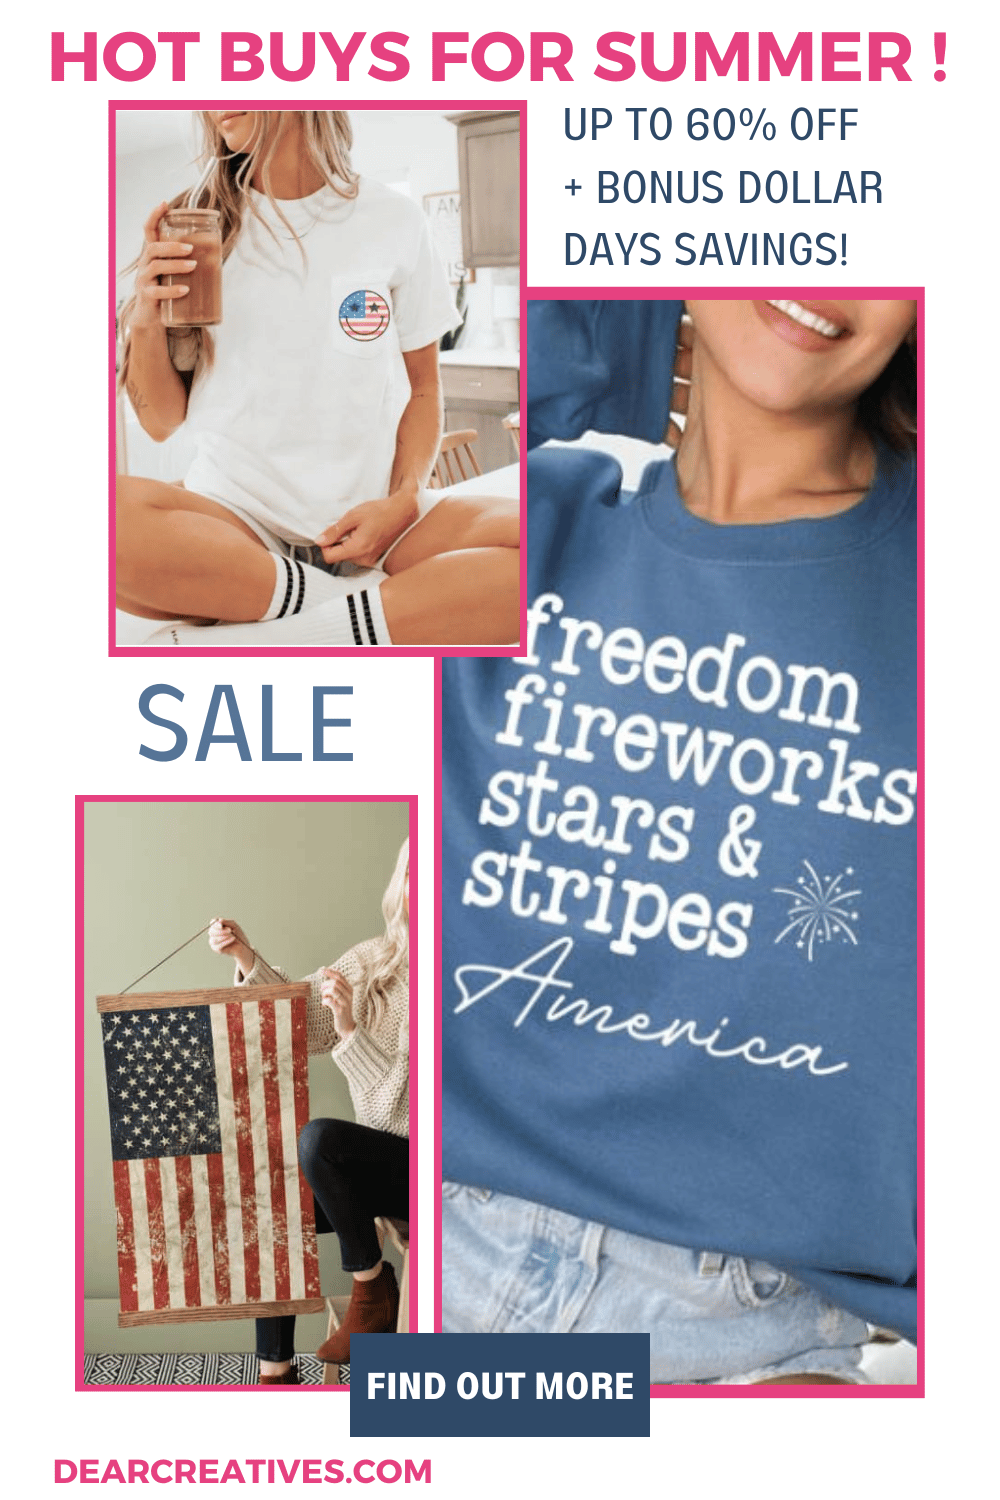 Hot Buys For Summer! SAVE Up to 60% off Fashions and Decor for summer , vacations, and the 4th of July + Bonus Dollar Days Savings! Find out more at DearCreaives.com 